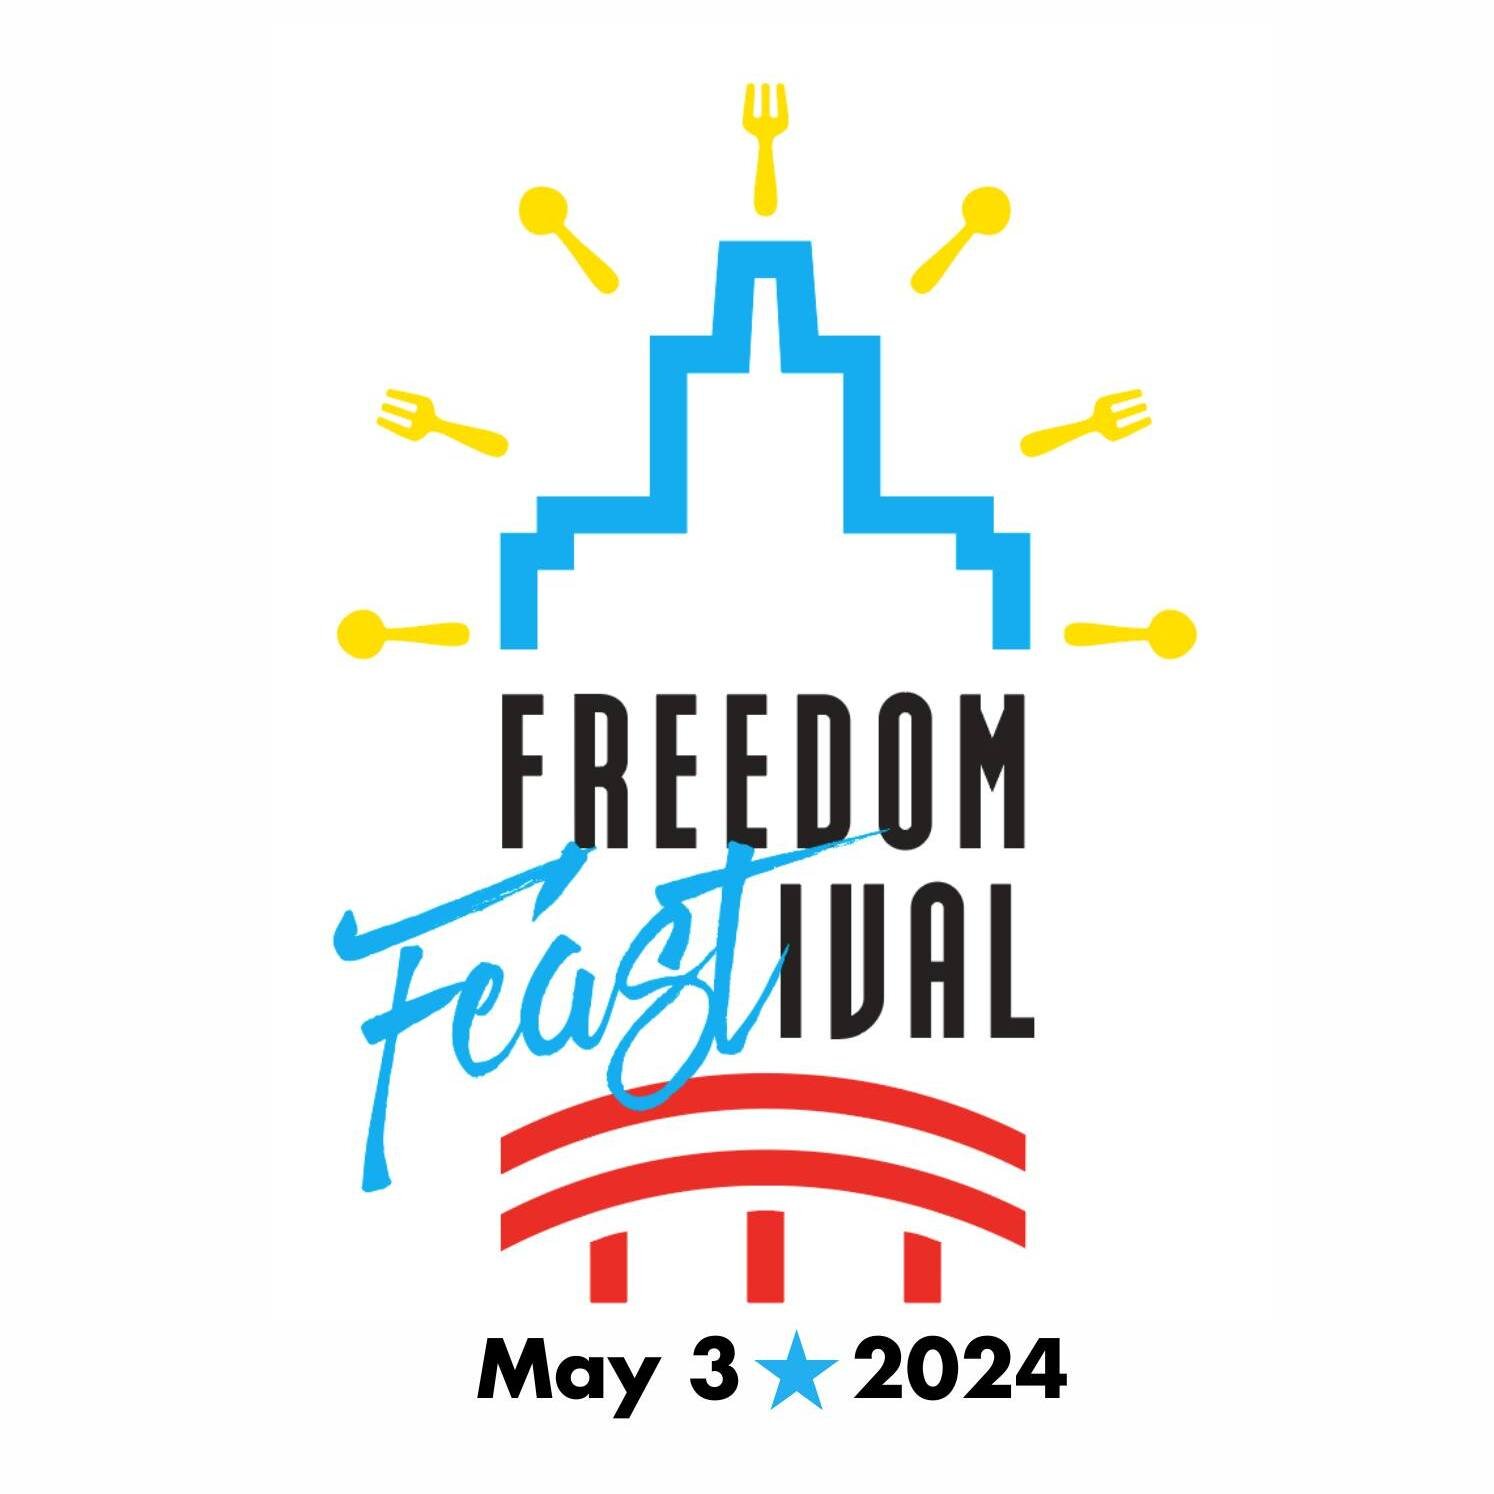 ⭐ NEW EVENT!!!!!⭐

You're reading that correctly! It DOES say Freedom FEASTival! 

The Cedar Rapids Freedom Festival is thrilled to unveil a brand new event that promises to be a feast for the senses &ndash; Freedom FEASTival. At this free event, tak